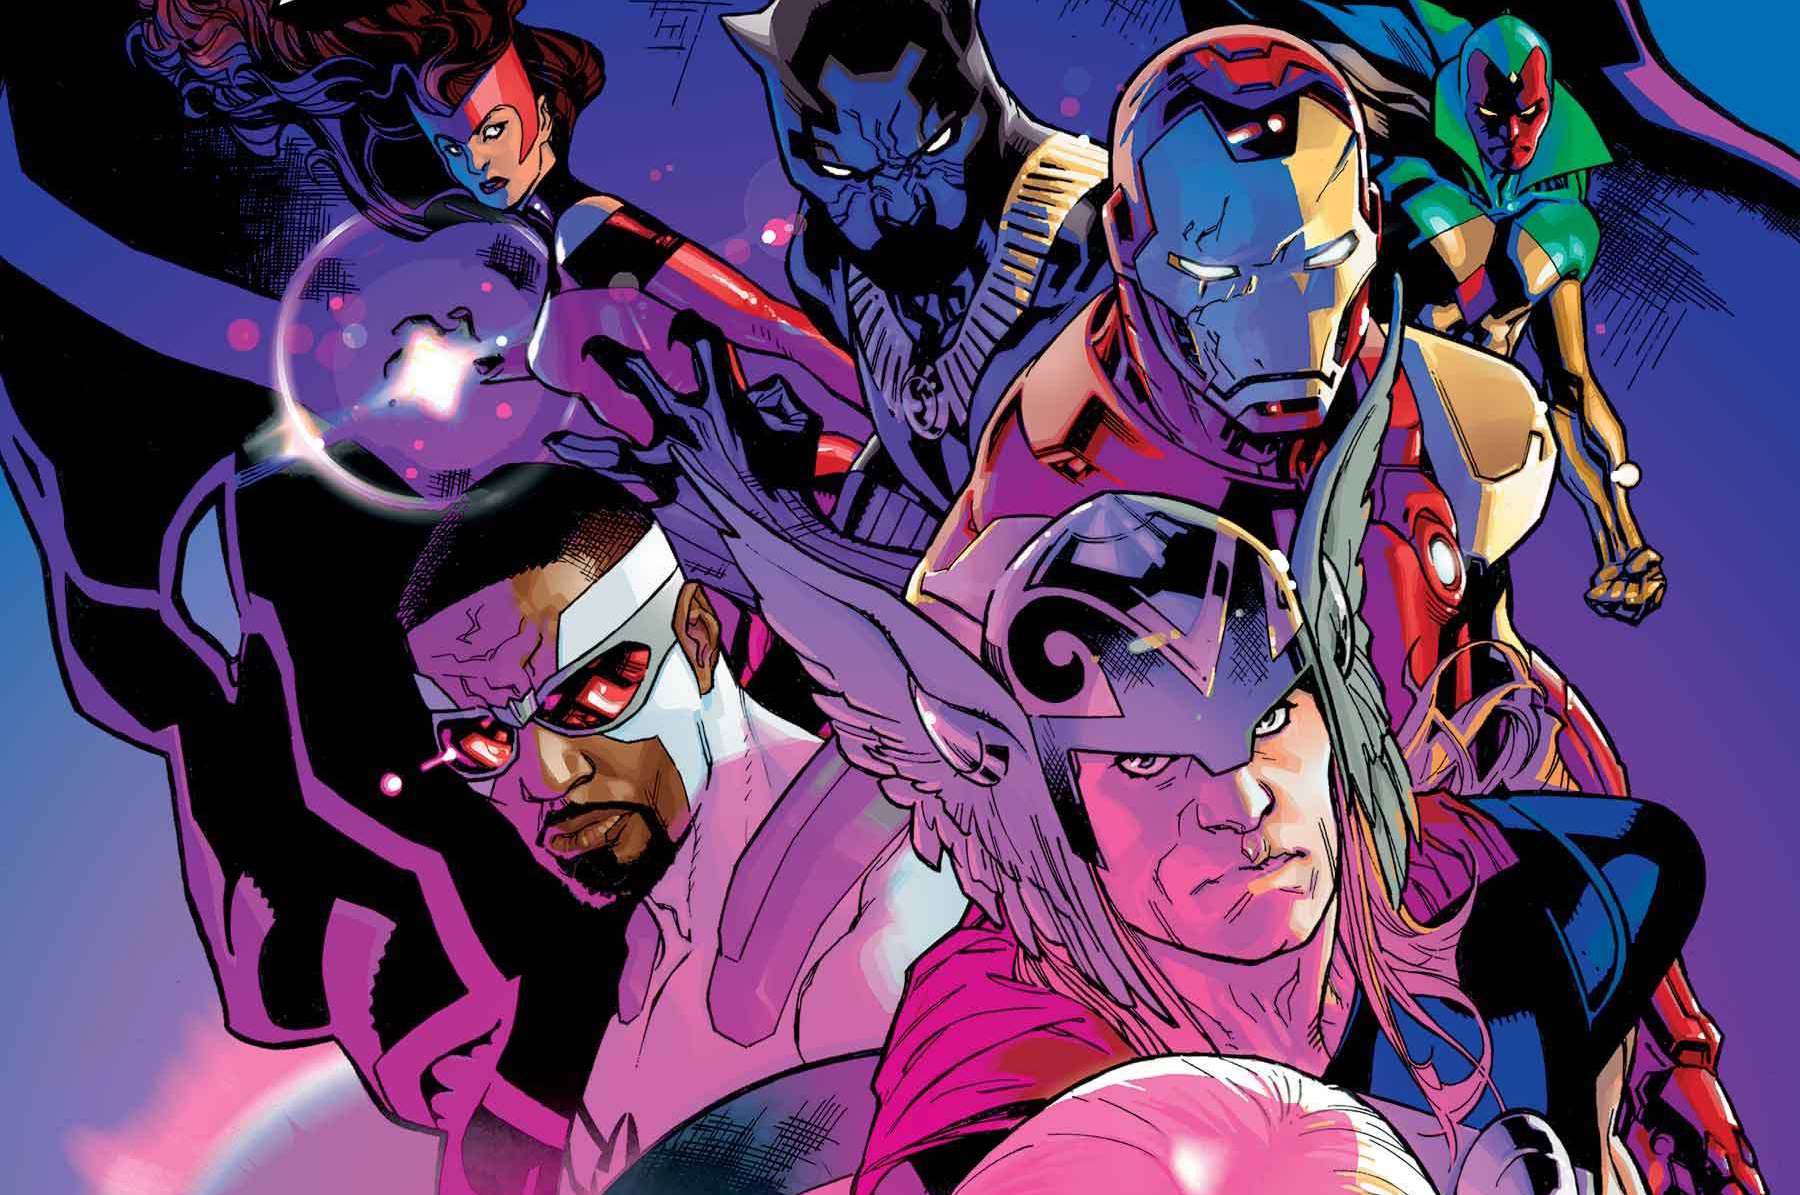 'Avengers' #2 delivers action and exposition expertly